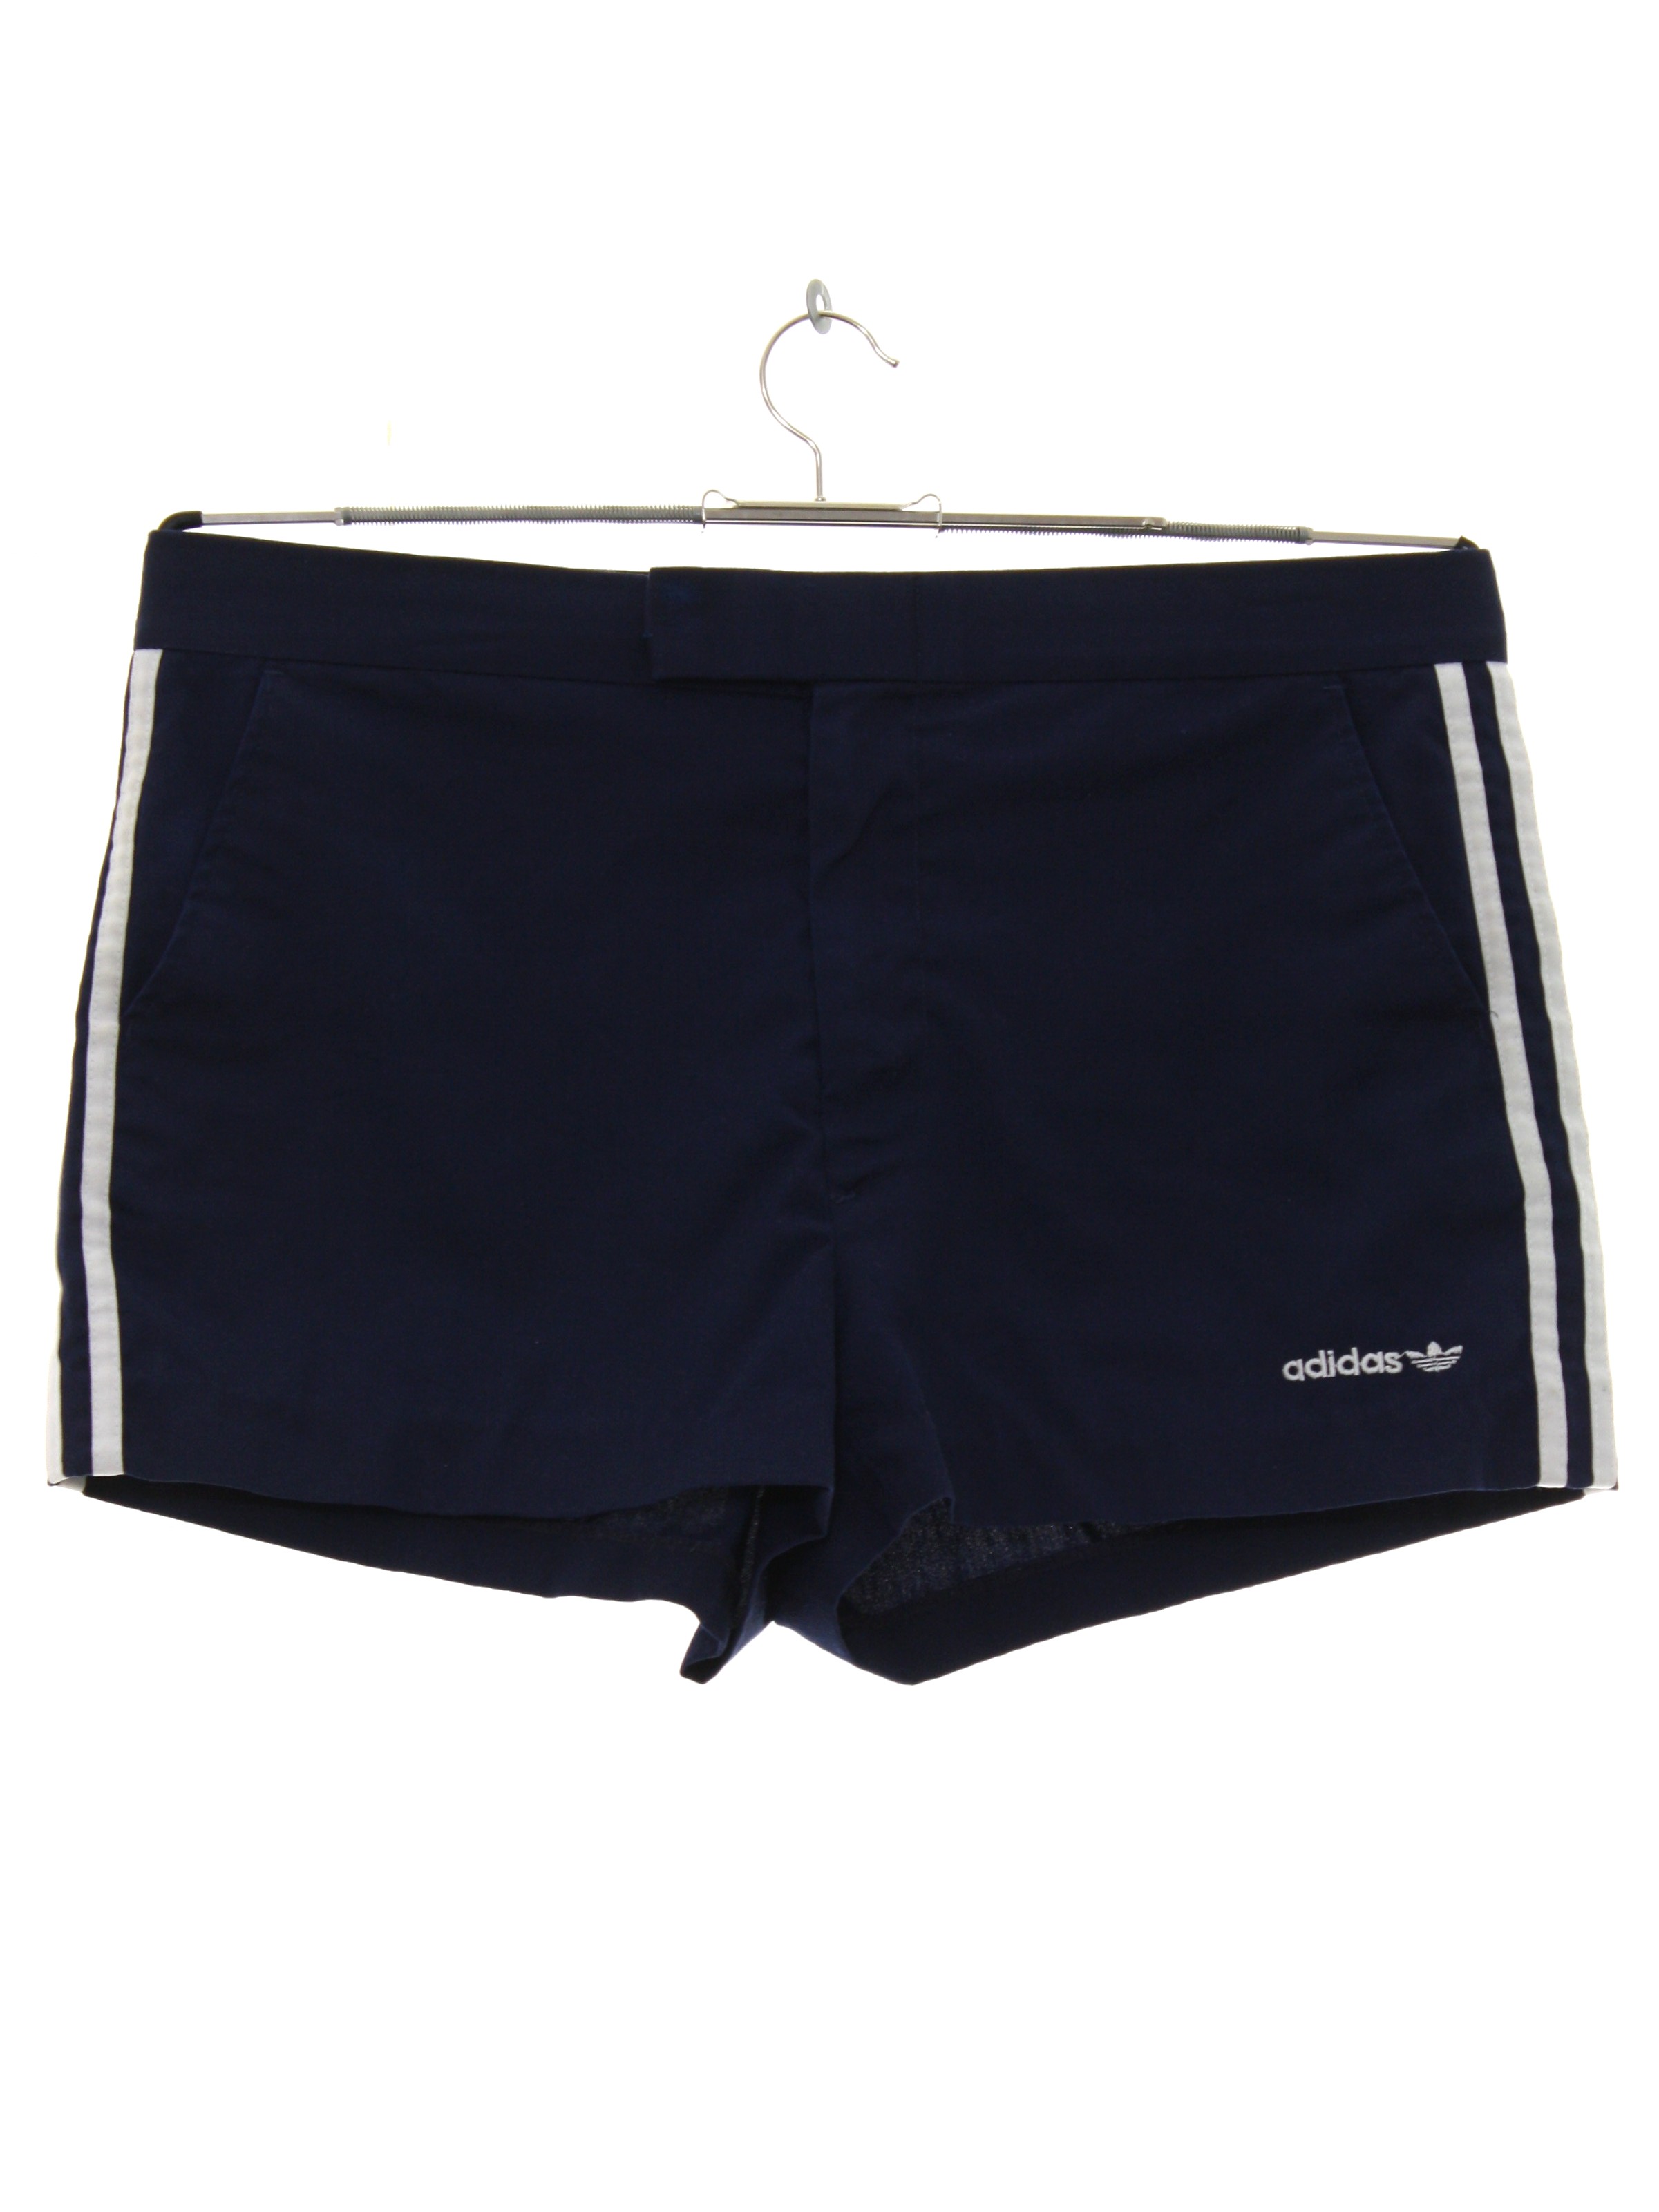 Retro 1980s Shorts: 80s -Adidas- Mens navy blue background with white ...